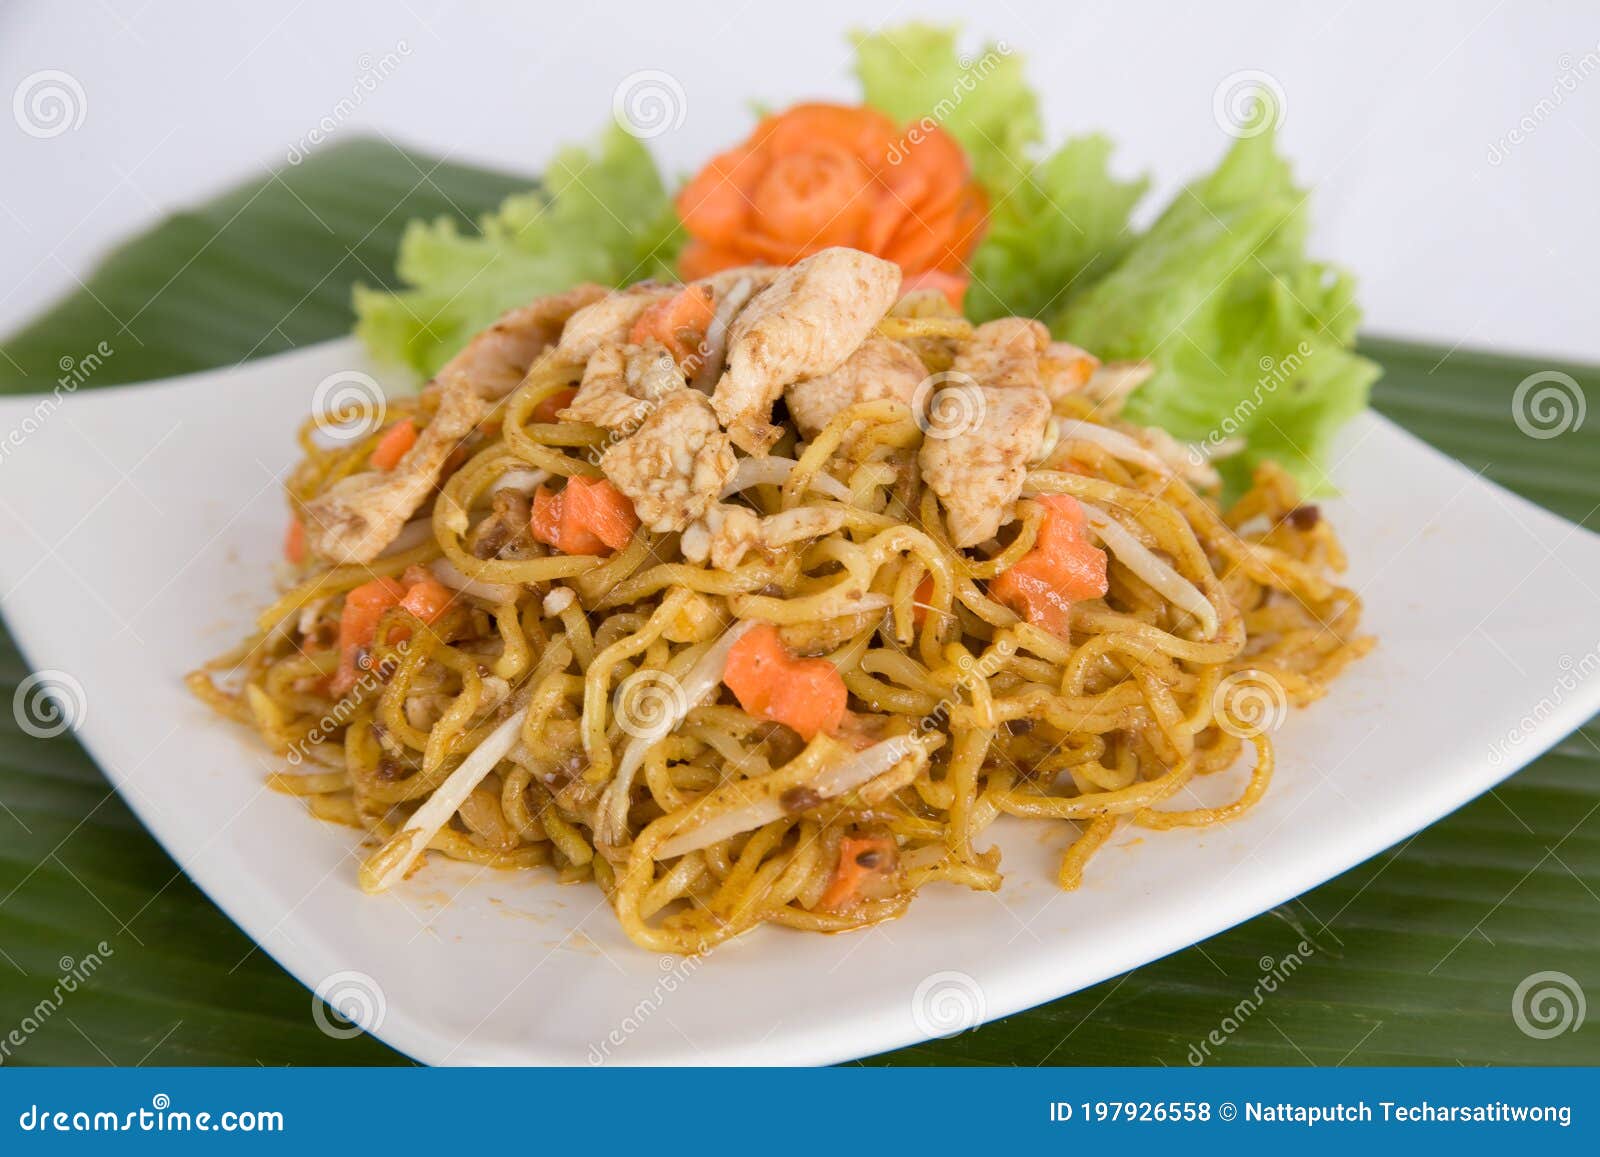 chinese stir fried noodles with chicken